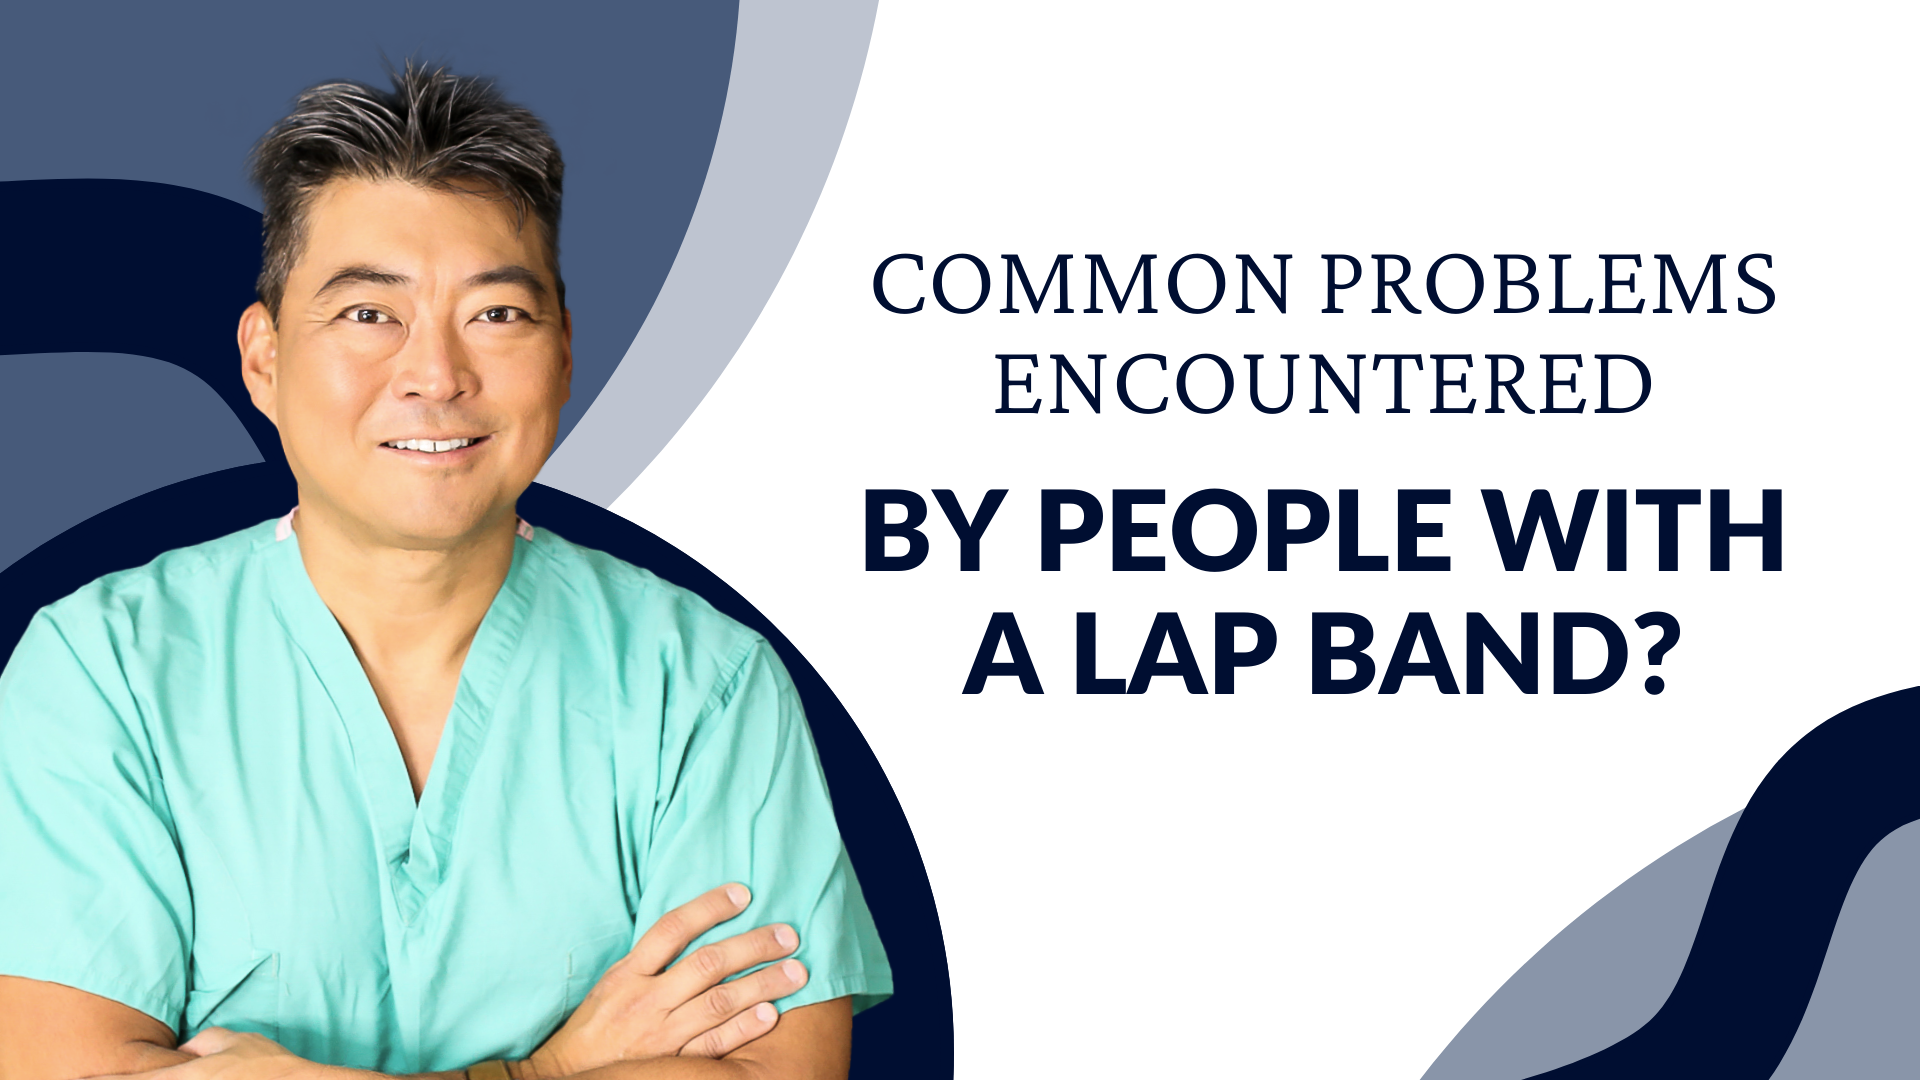 Common Problems Encountered by People With a Lap Band